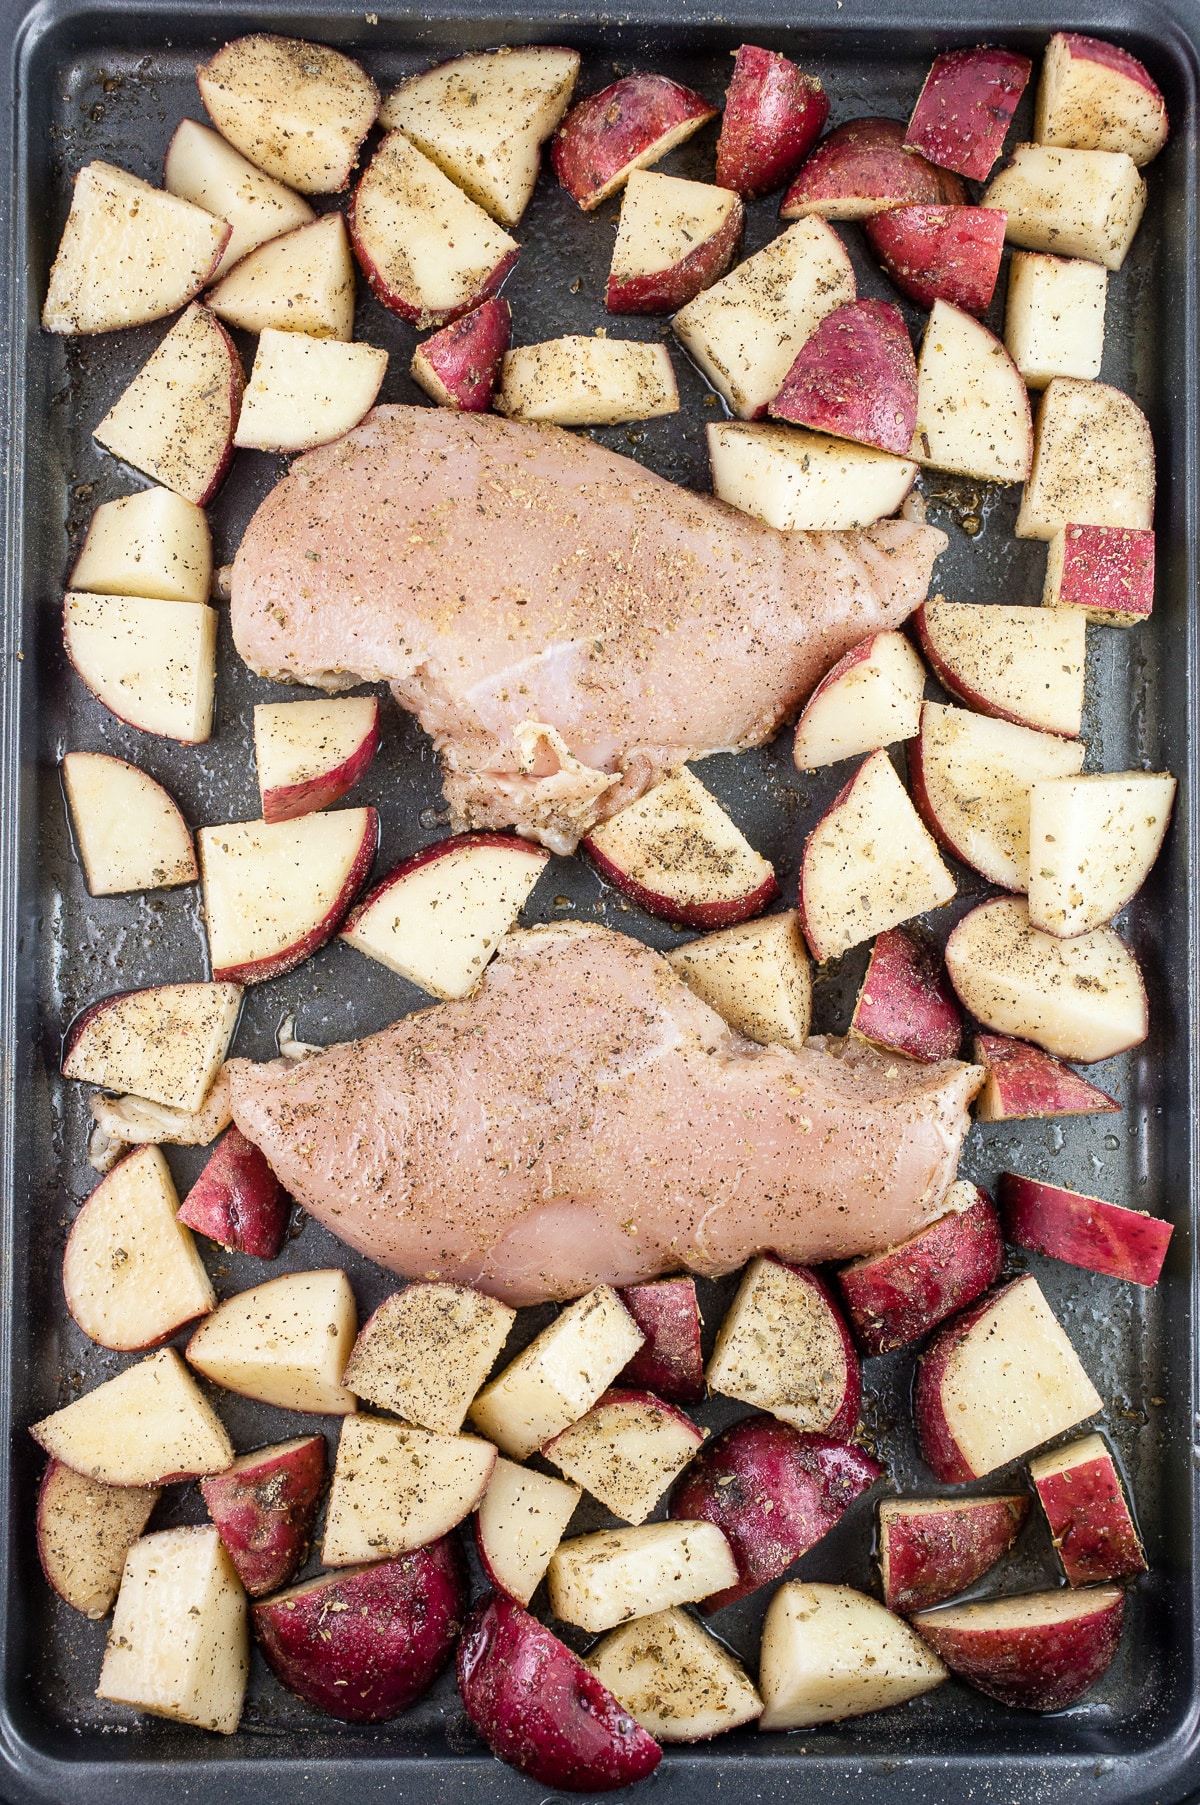 Uncooked chicken and diced red potatoes with olive oil and spices on baking sheet.